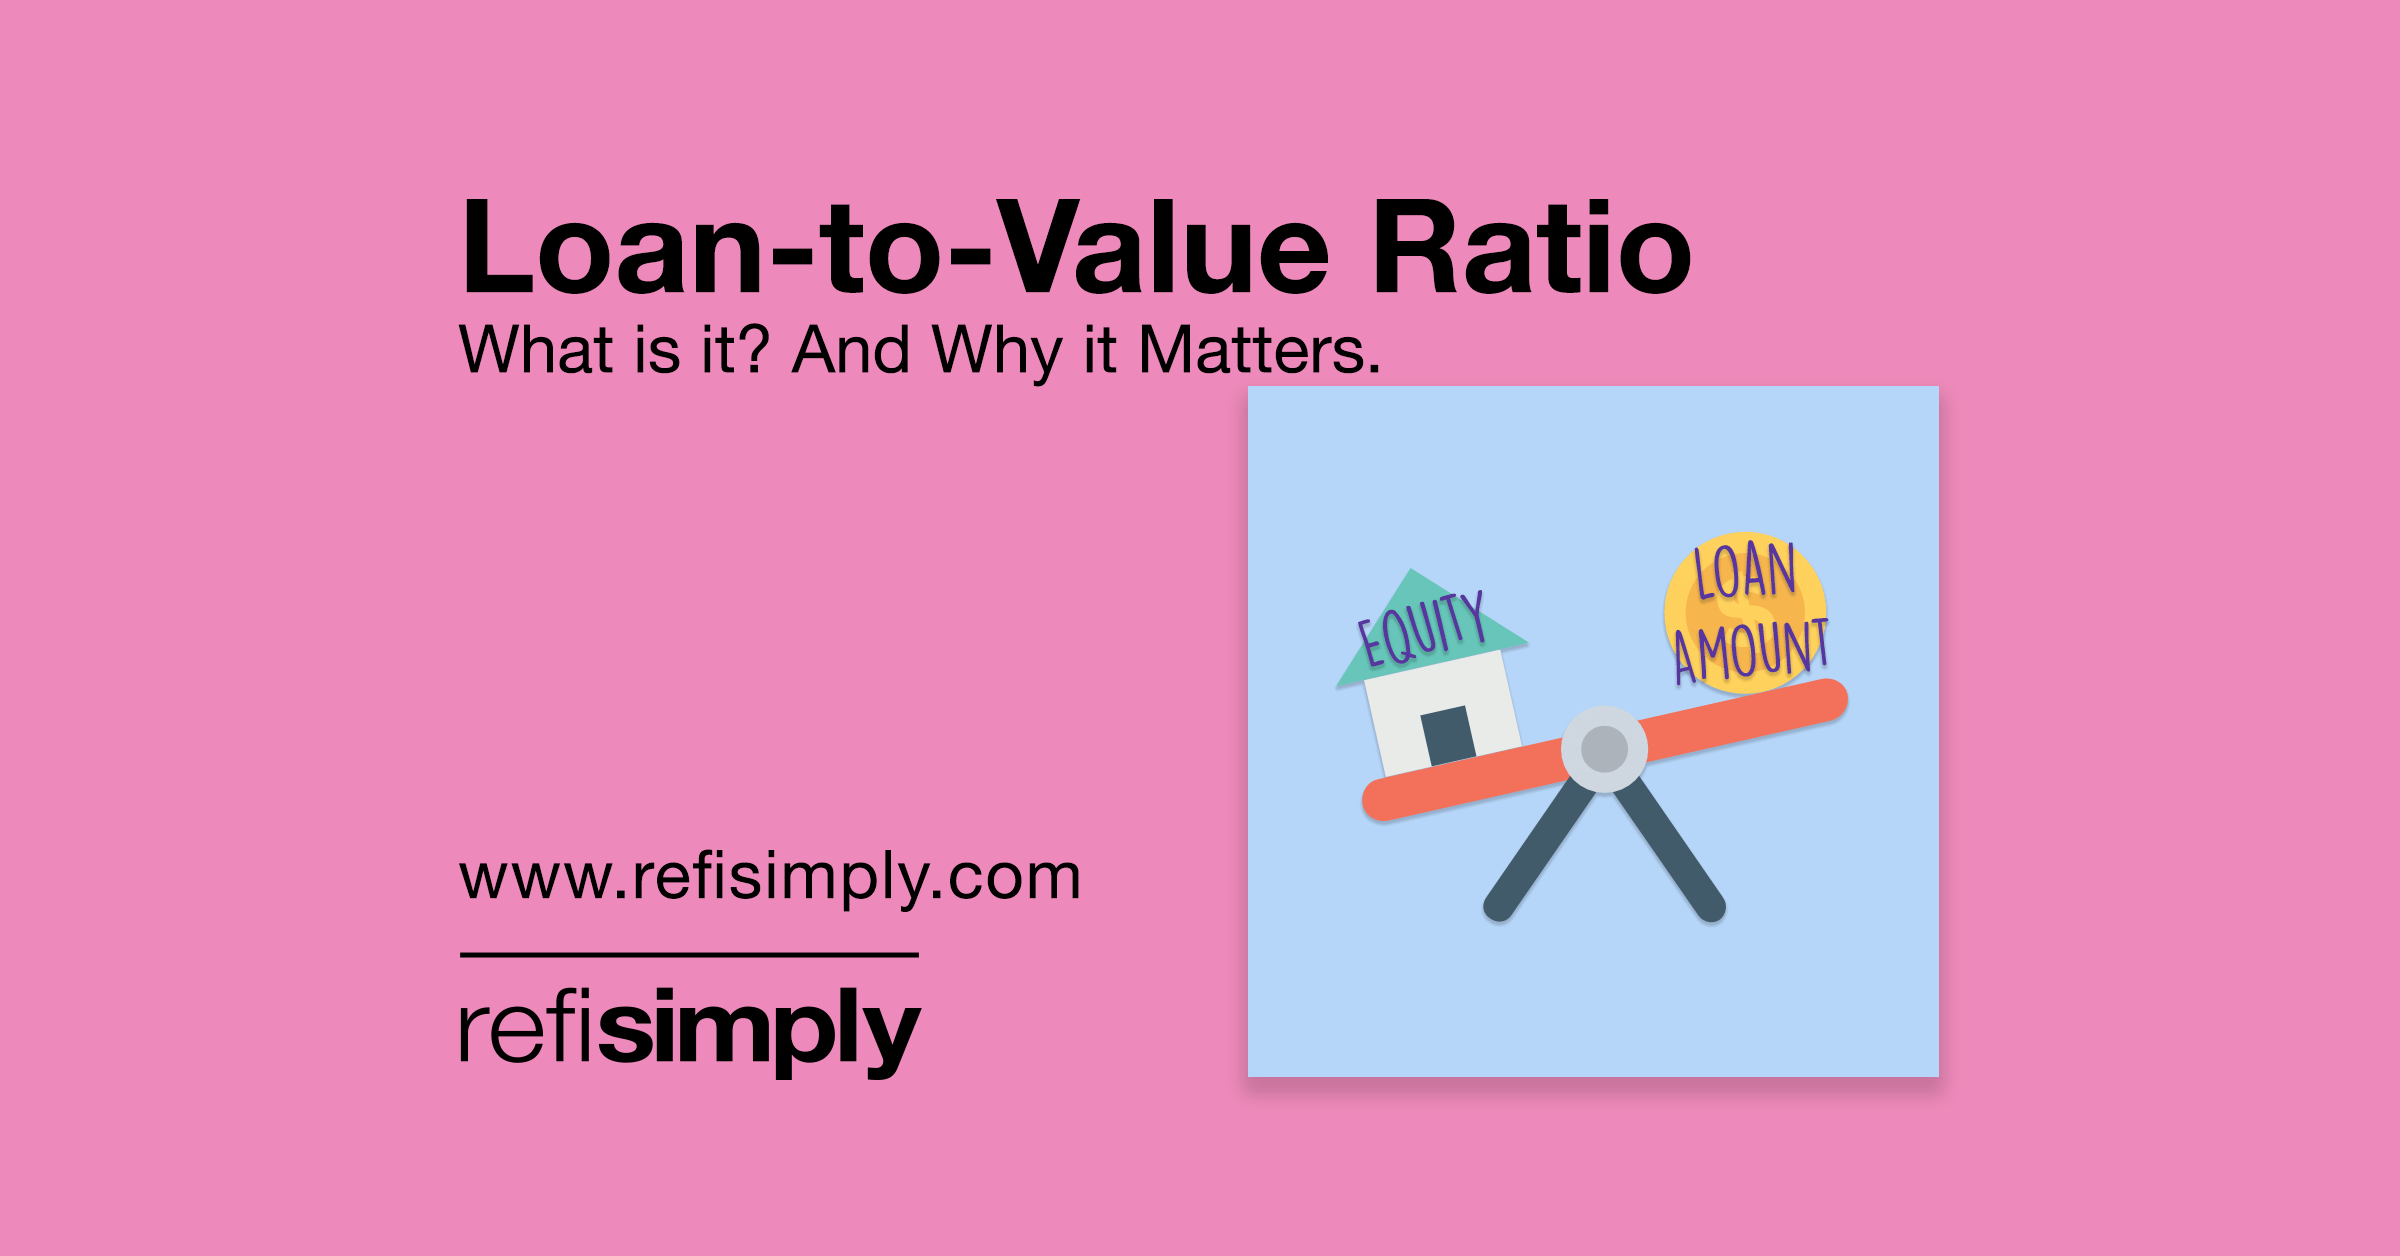 loan-to-value ratio